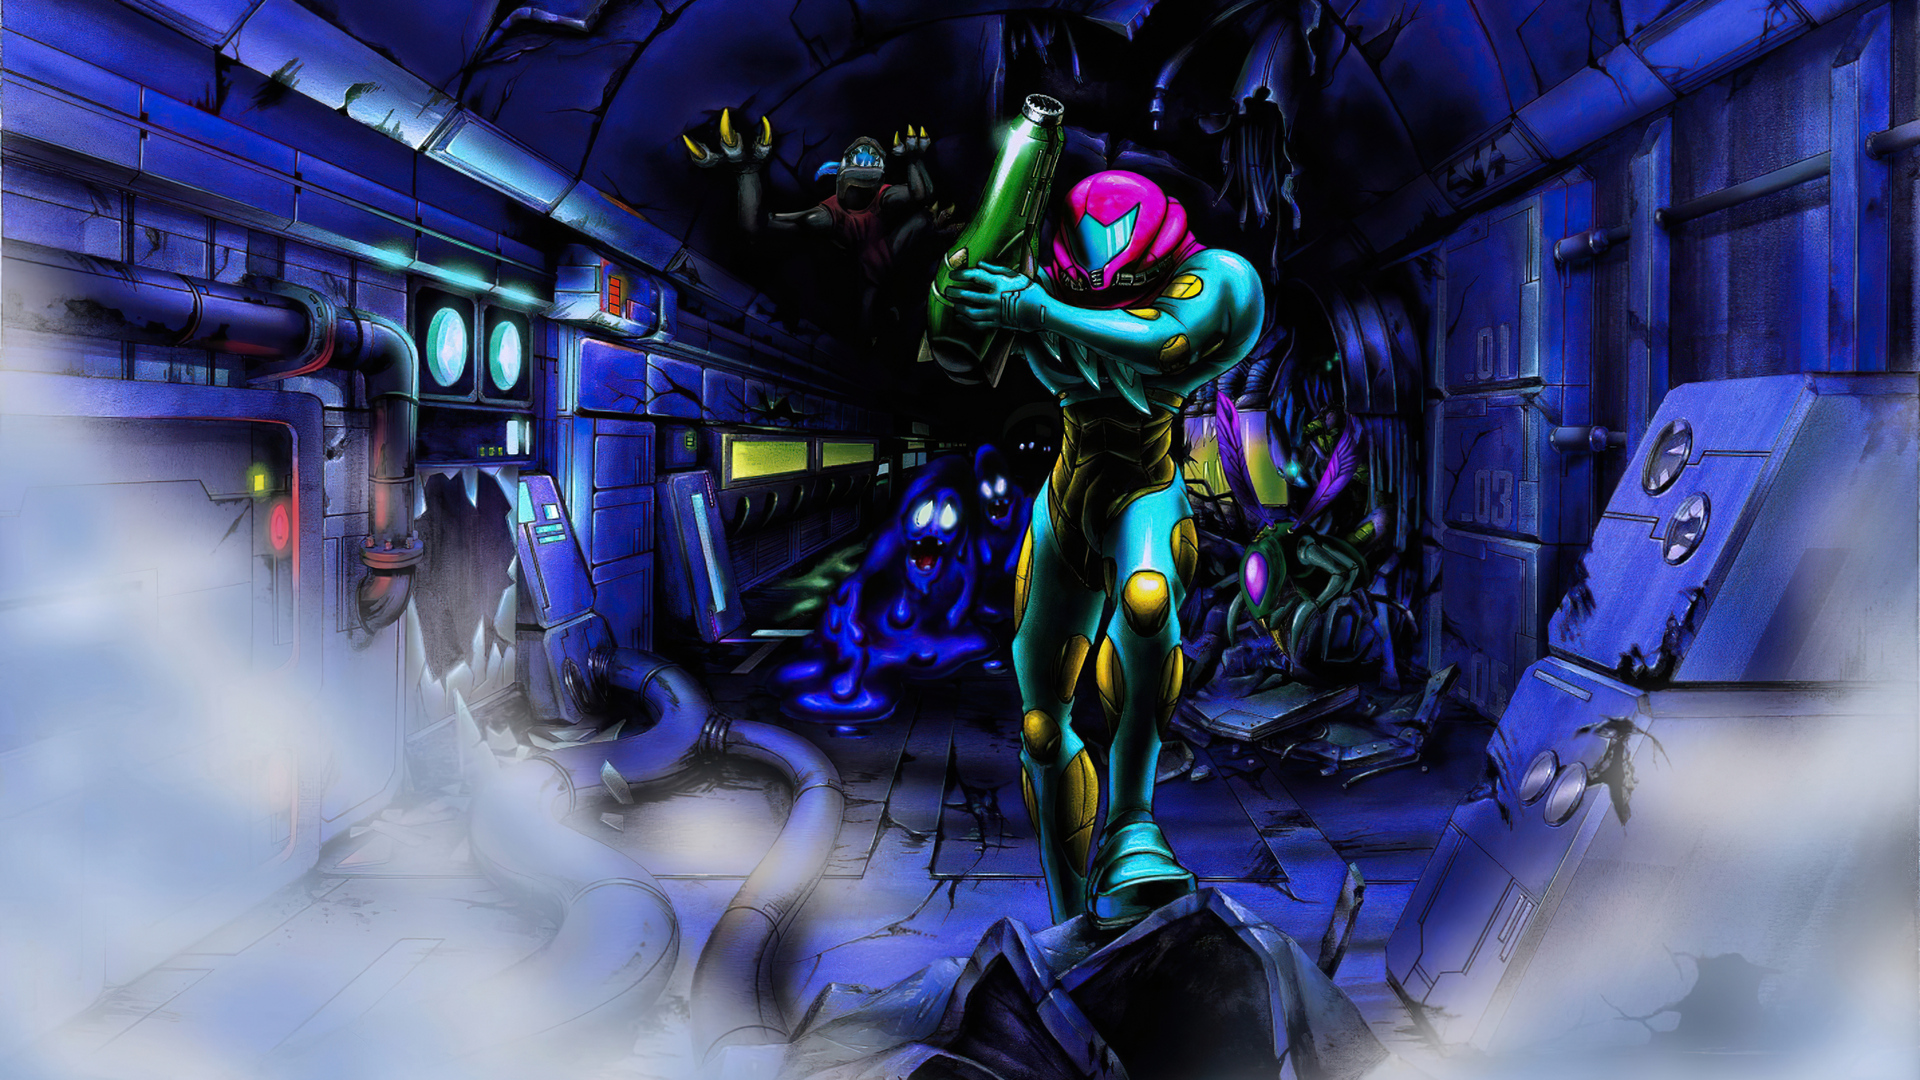 1920x1080 Metroid Samus Aran 4k Laptop Full Hd 1080p Hd 4k Wallpapers Images Backgrounds Photos And Pictures